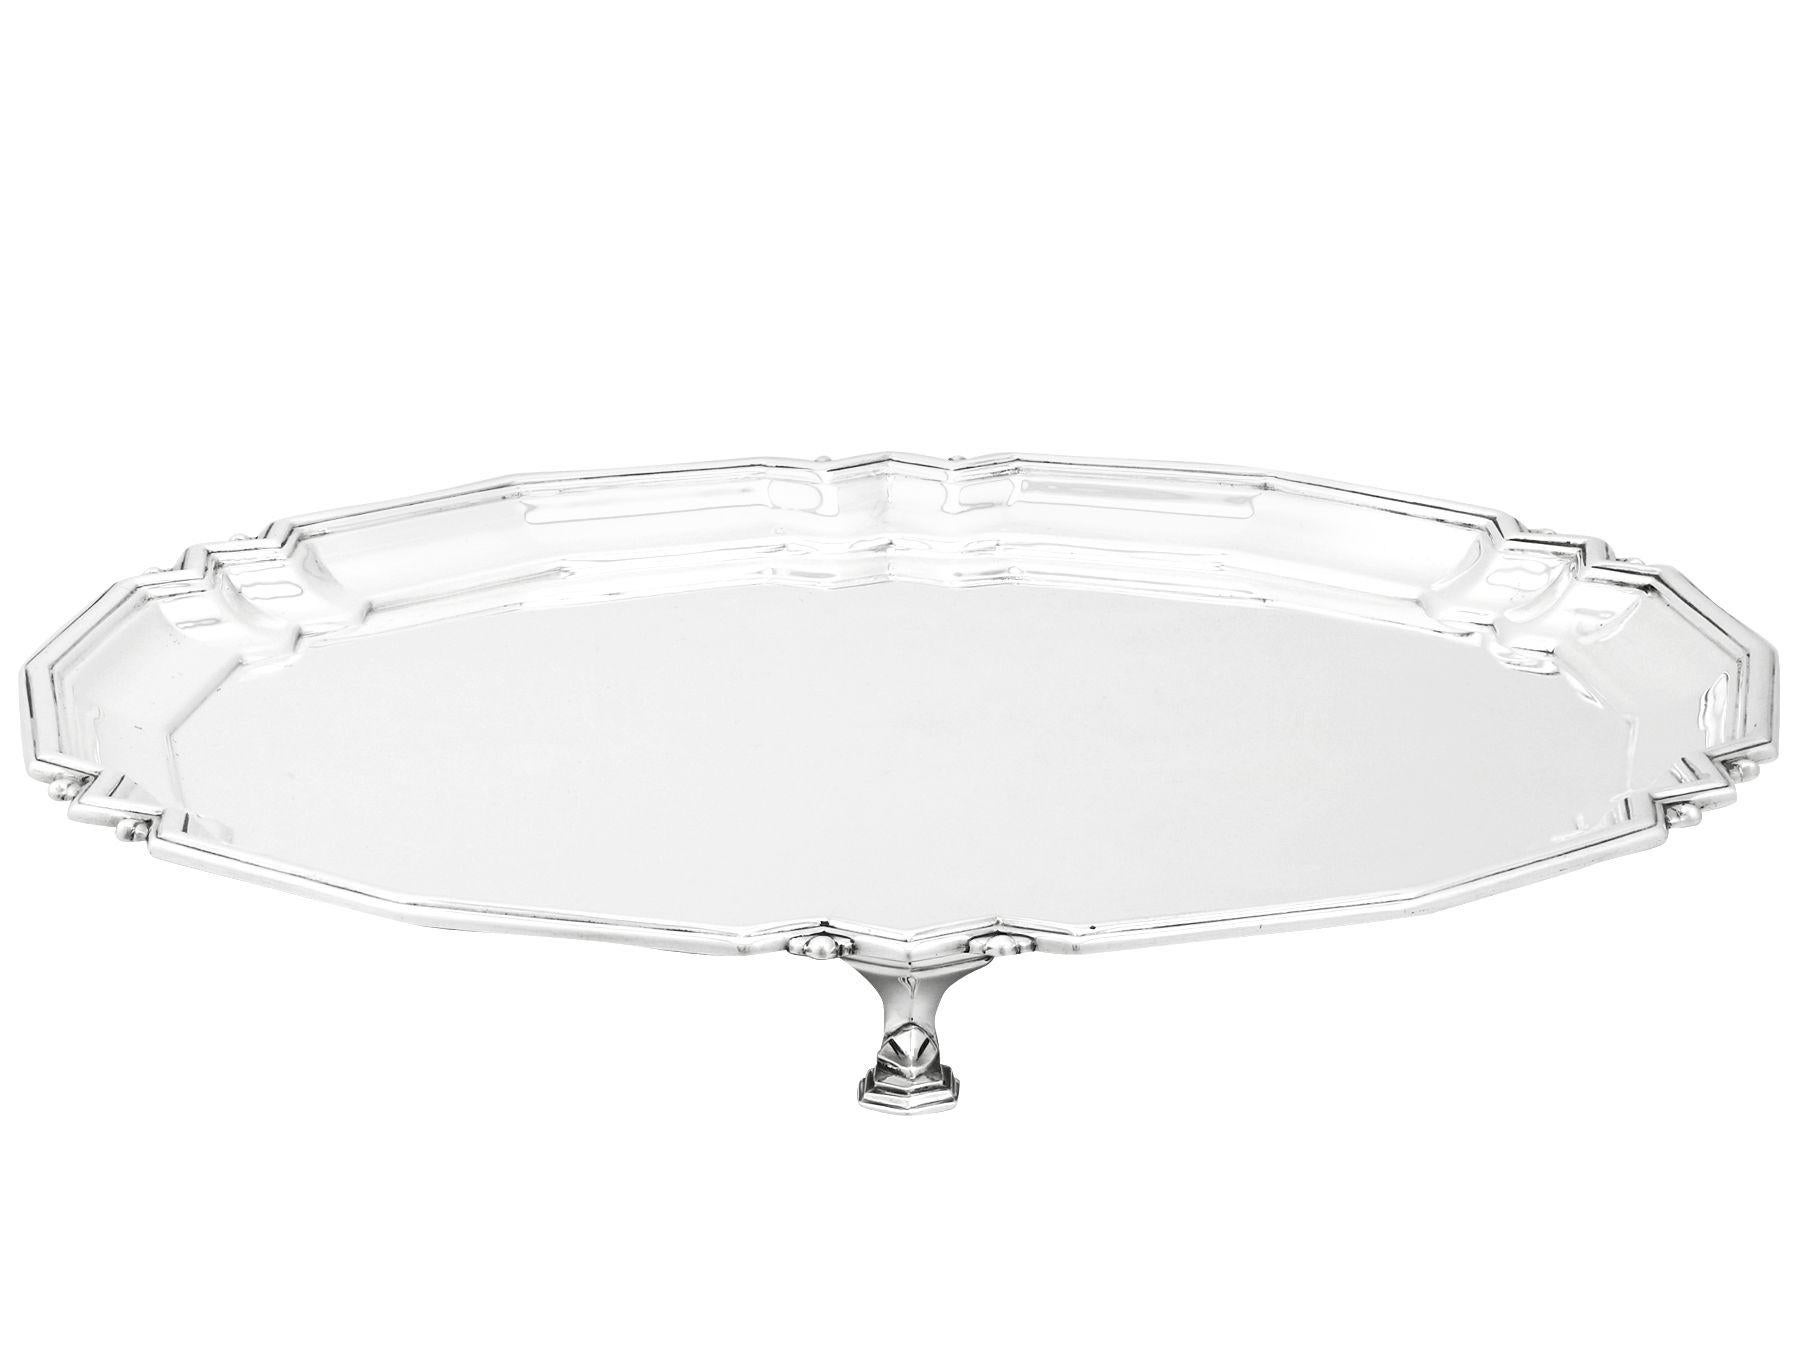 Mappin and Webb Ltd 1933 Art Deco Antique Sterling Silver Salver In Excellent Condition For Sale In Jesmond, Newcastle Upon Tyne